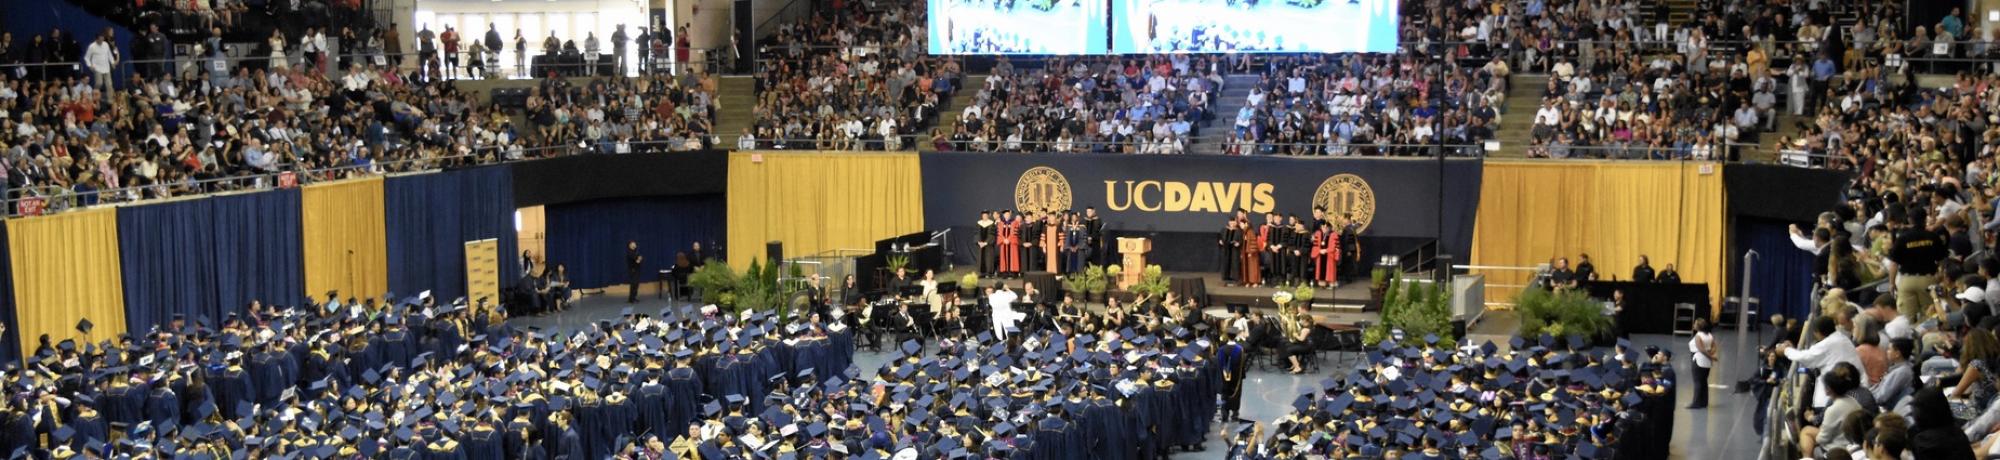 2019 College of Engineering Commencement